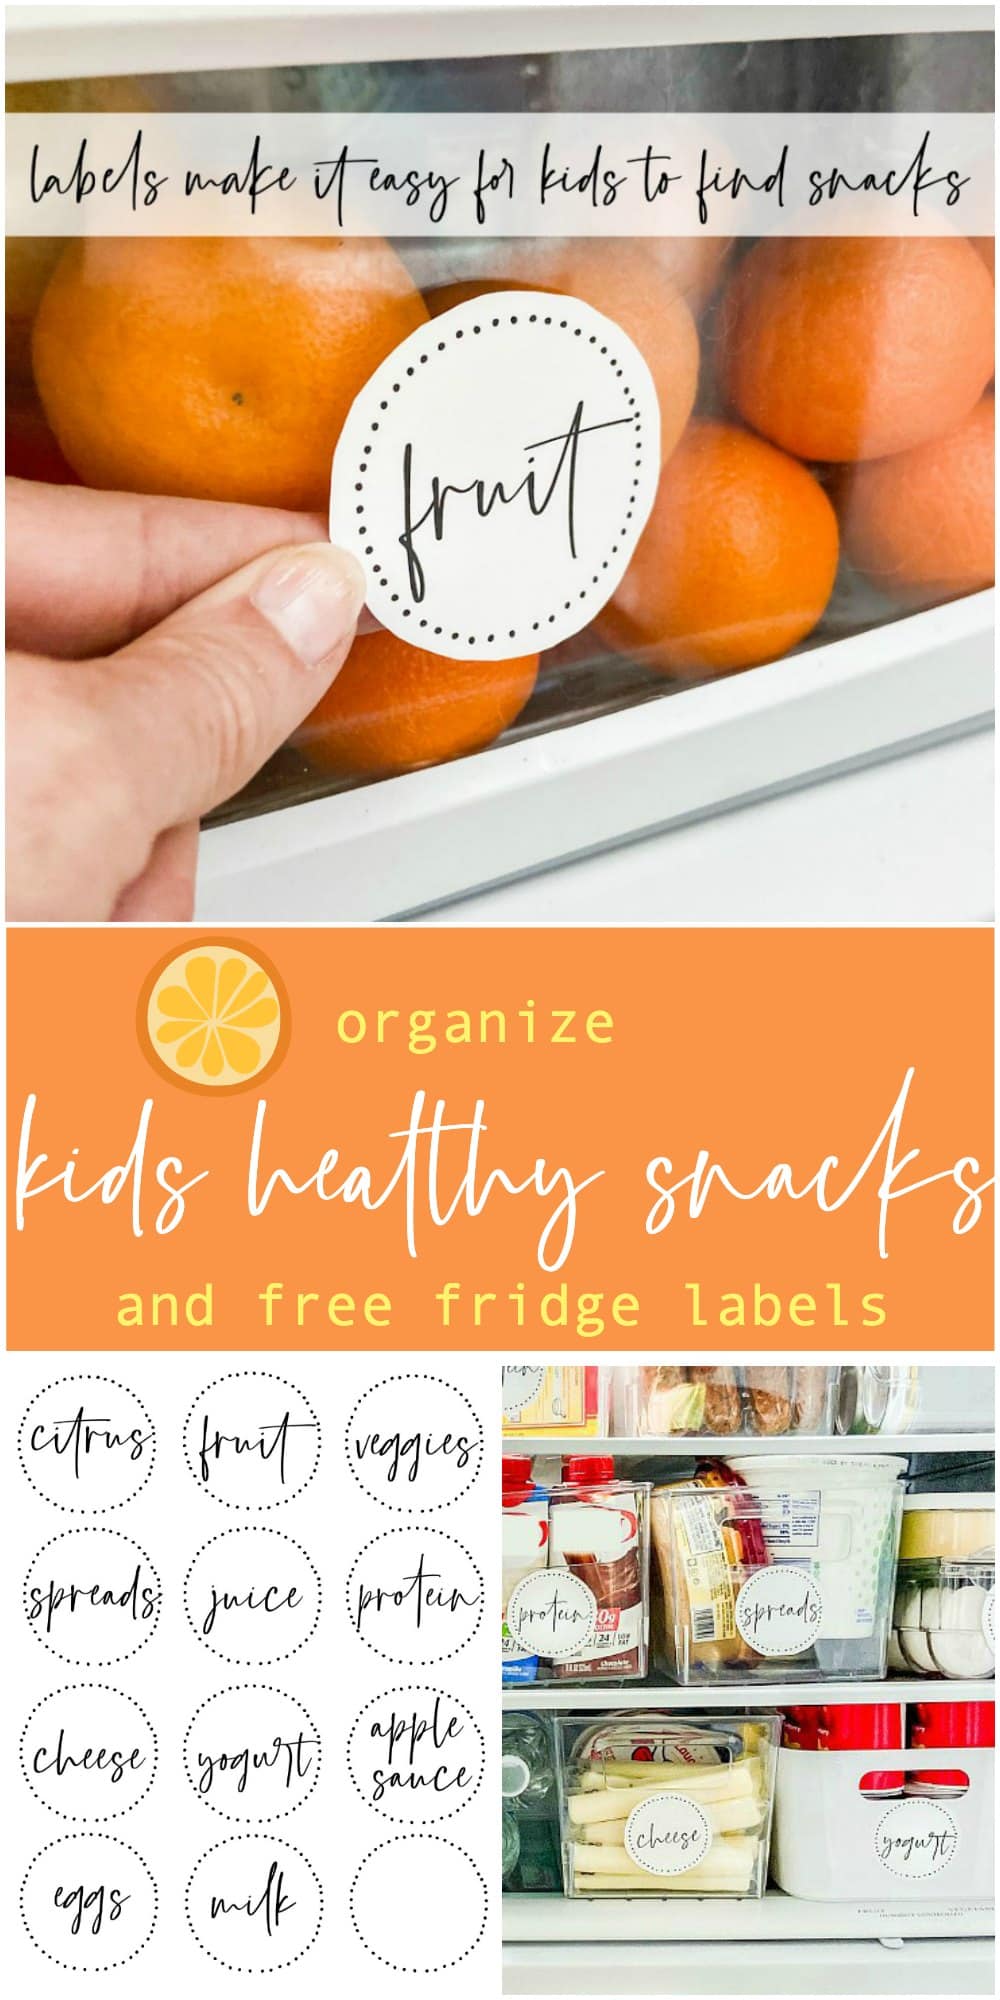 Easy Kids’ Grab-and-Go Snacks and Lunches plus Printable Fridge Labels! Creating Easy Kids’ Grab-and-Go Snacks and Lunches! With kids home more, here are some easy ways for them to grab healthy snacks and lunches with no fuss!